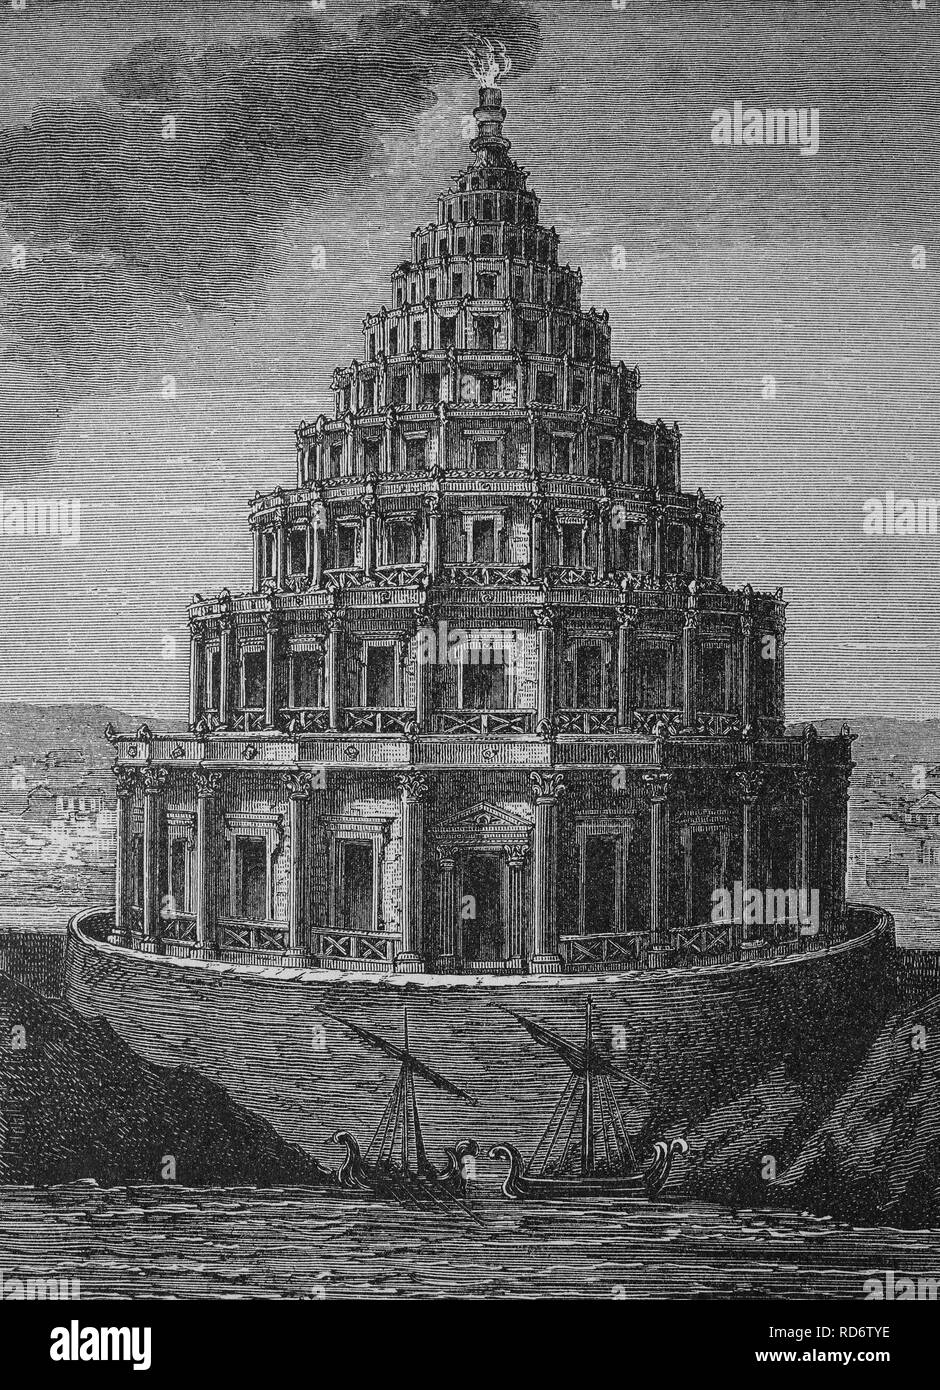 Lighthouse of Pharos, one of the seven wonders of the ancient world, Alexandria, Egypt, historical woodcut, circa 1870 Stock Photo